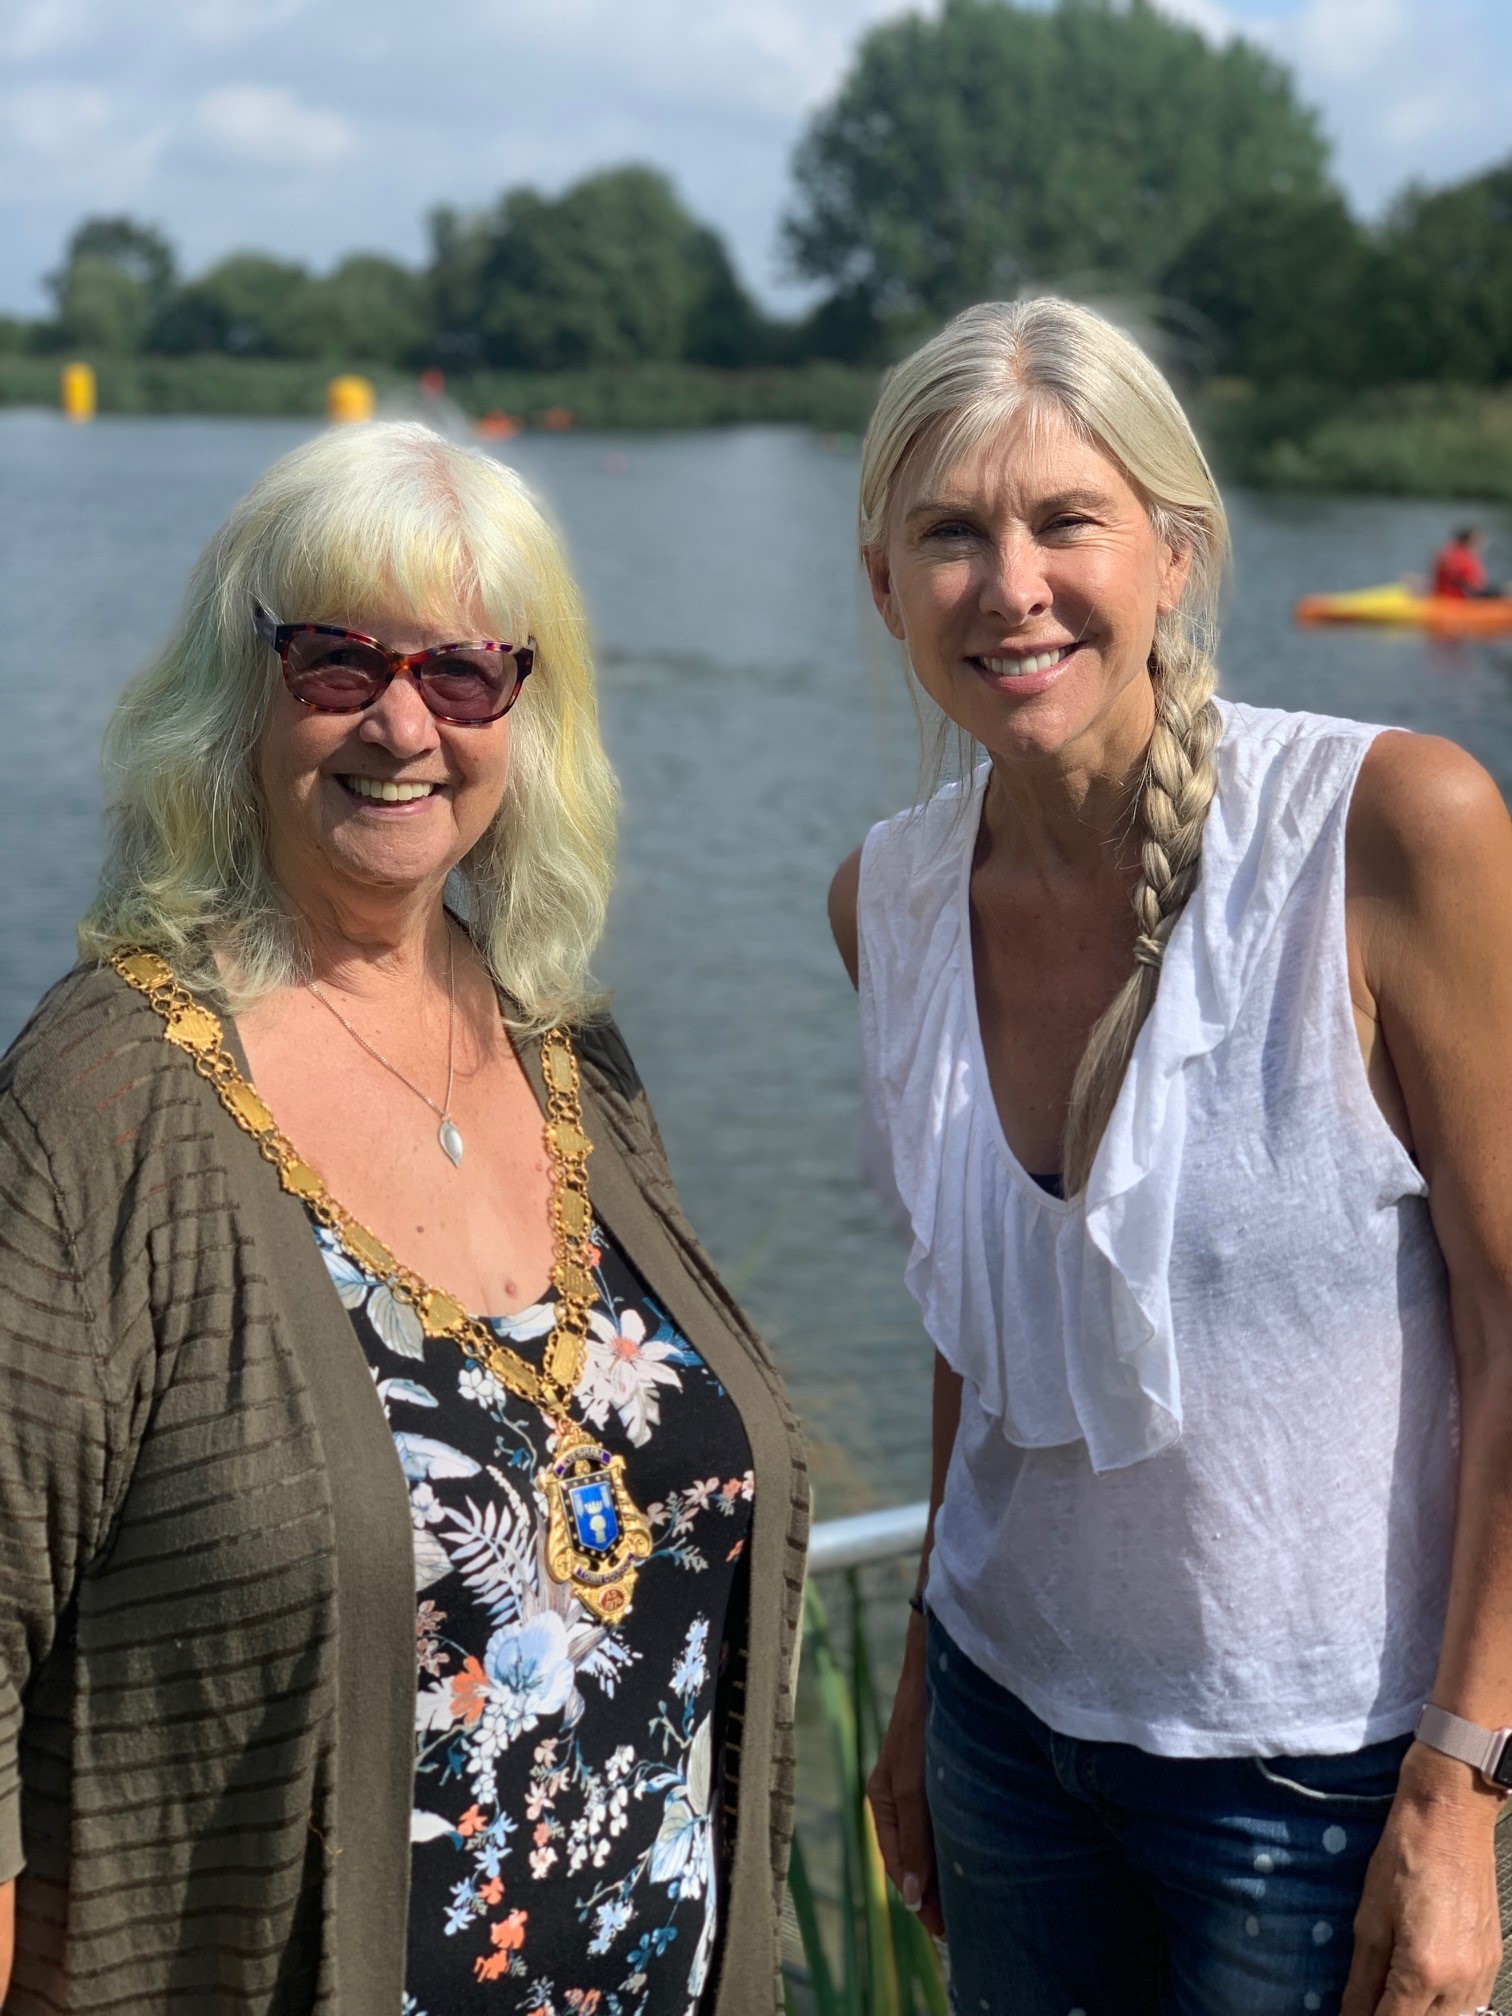 Mayor of Evesham, Cllr Sue Amor, and Sharron Davies were special guests at the event